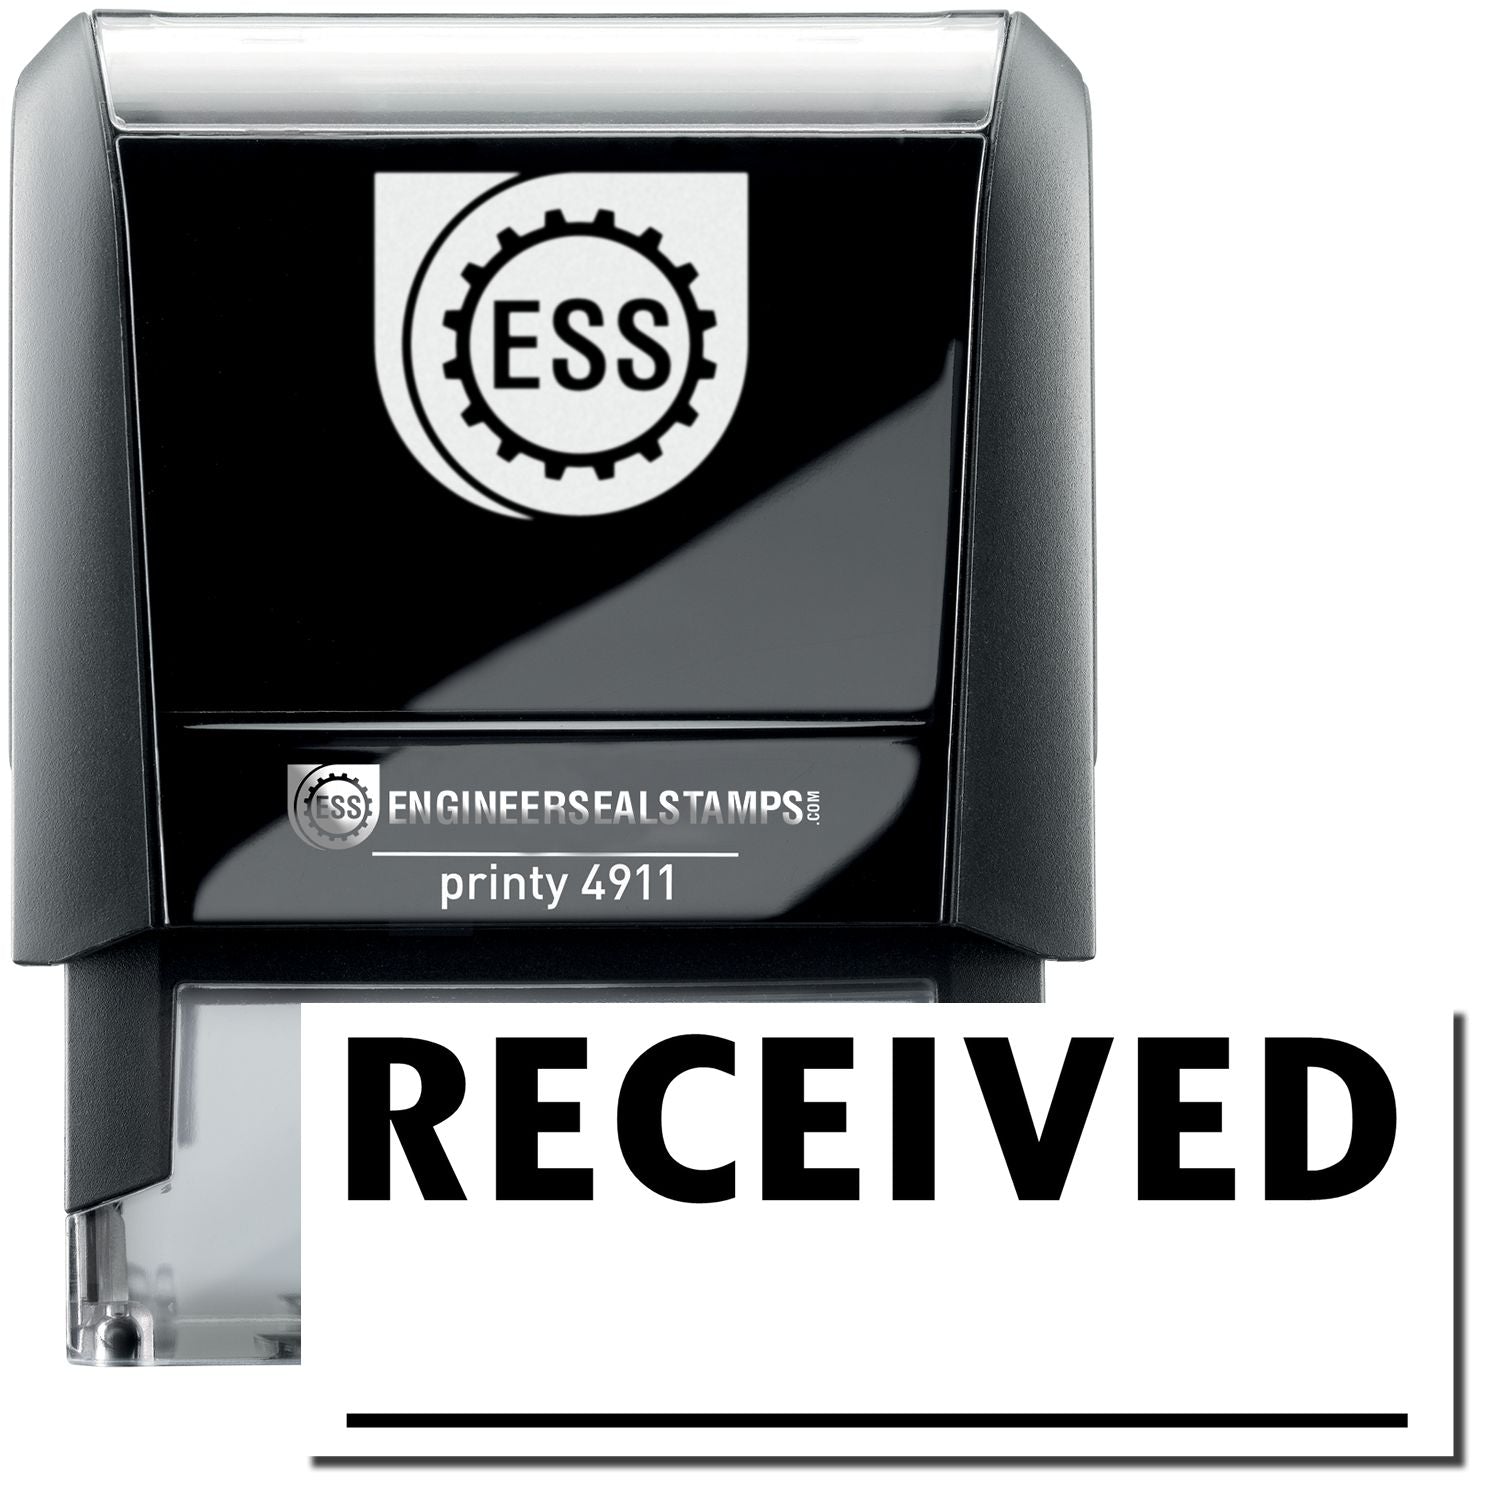 A self-inking stamp with a stamped image showing how the text "RECEIVED" with a line under it is displayed after stamping.